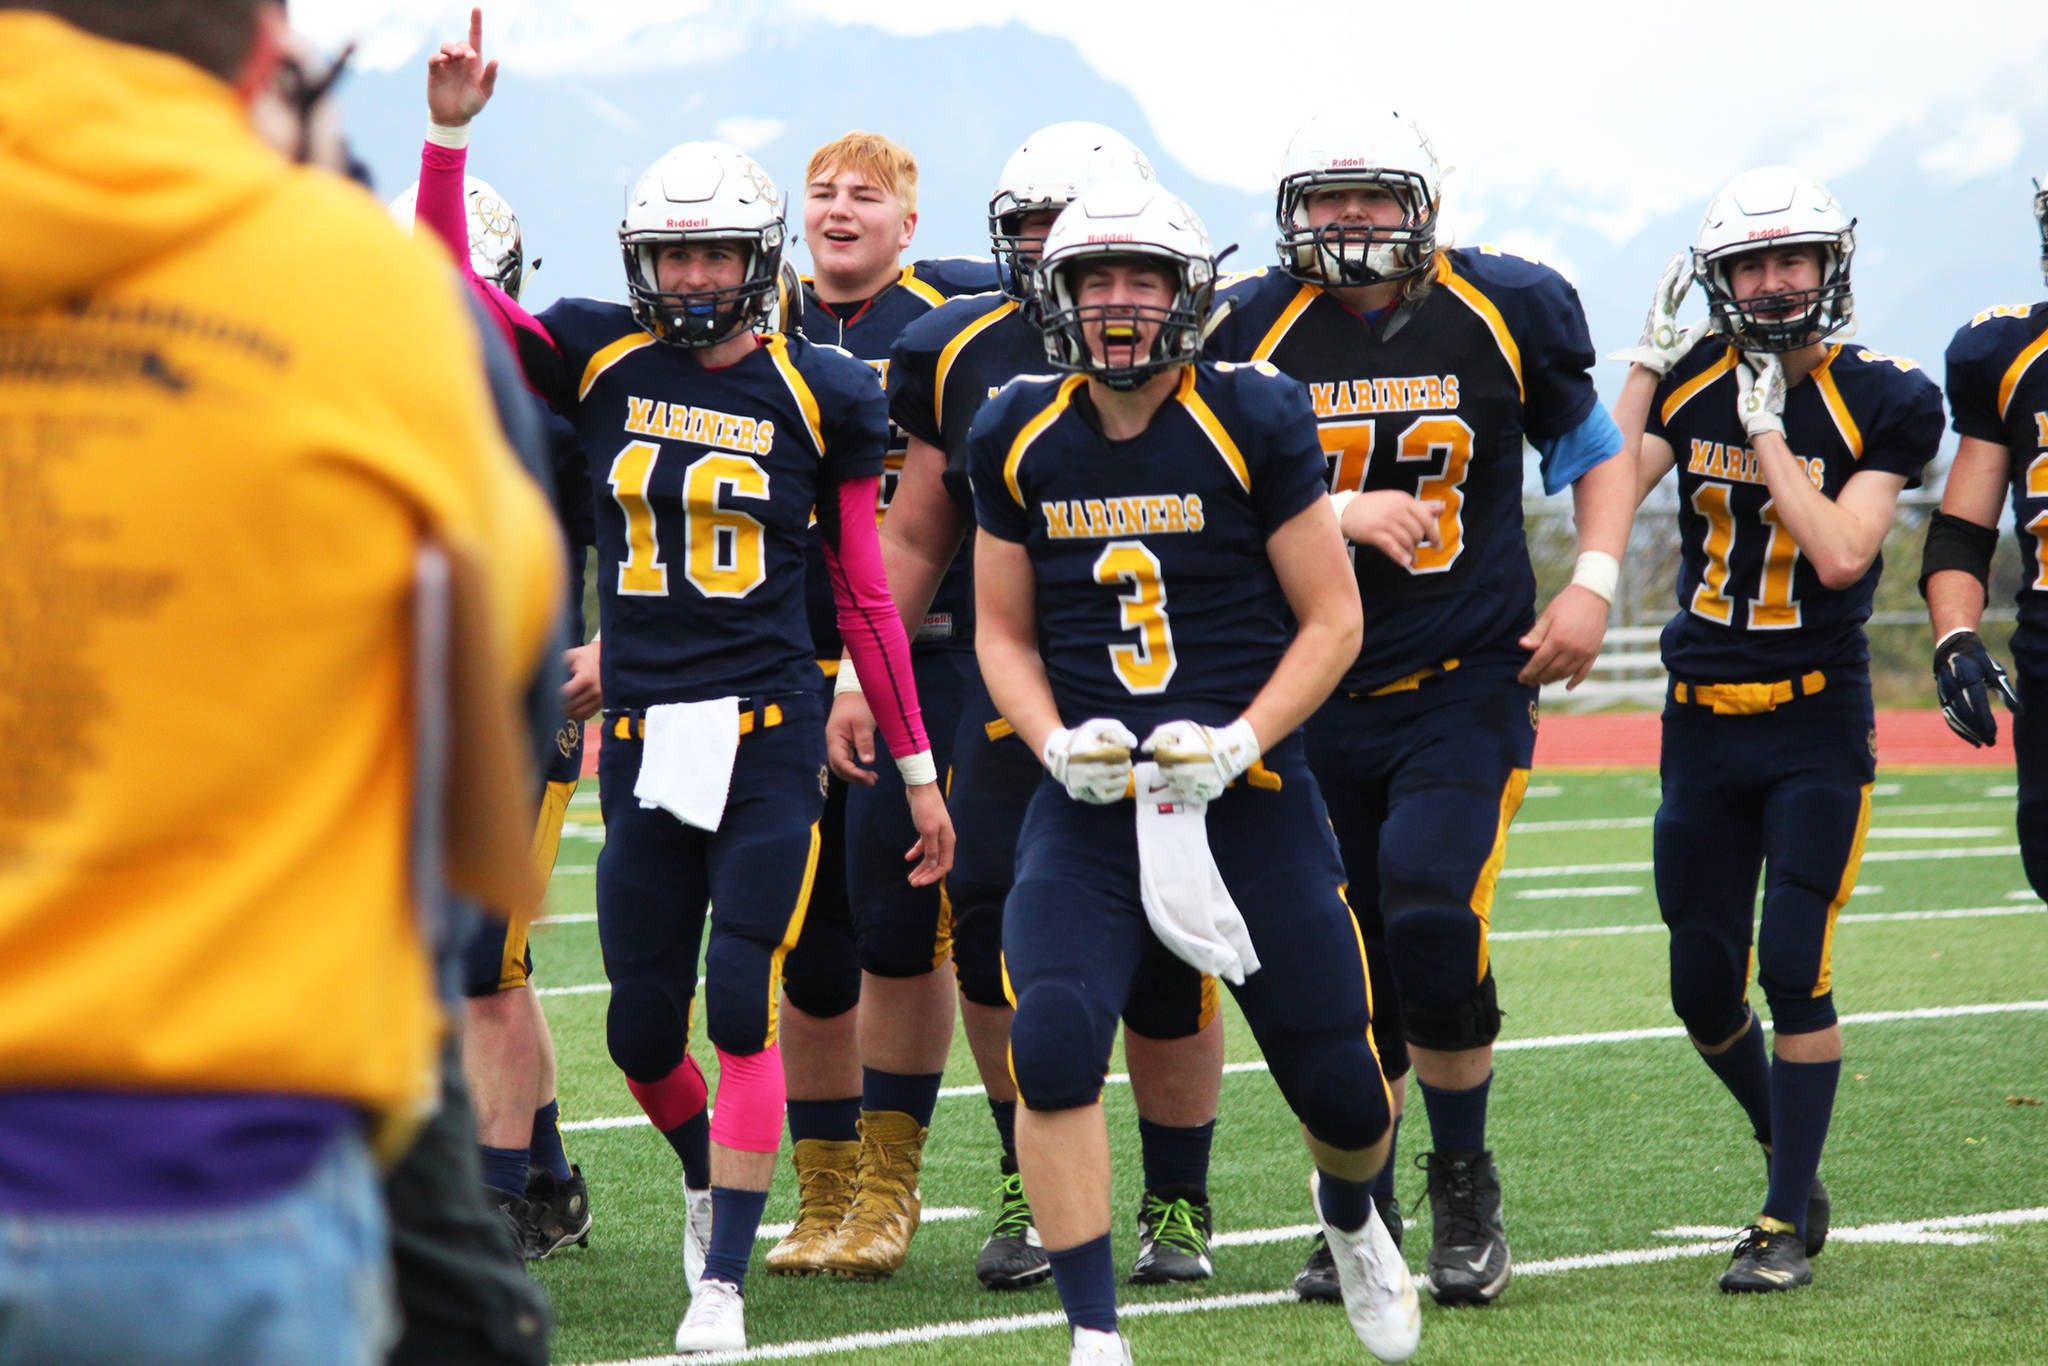 Justin Sumption (16) and Dawson Felde (3) come off the field celebrating with their teammates after defeating Ben Eielson High School in a playoff game Oct. 7, 2017 at Homer High School in Homer, Alaska. The Mariners went on to lose the ASAA First National Bowl Series Division III Championship game to the Barrow Whalers. (Photo by Megan Pacer/Homer News)